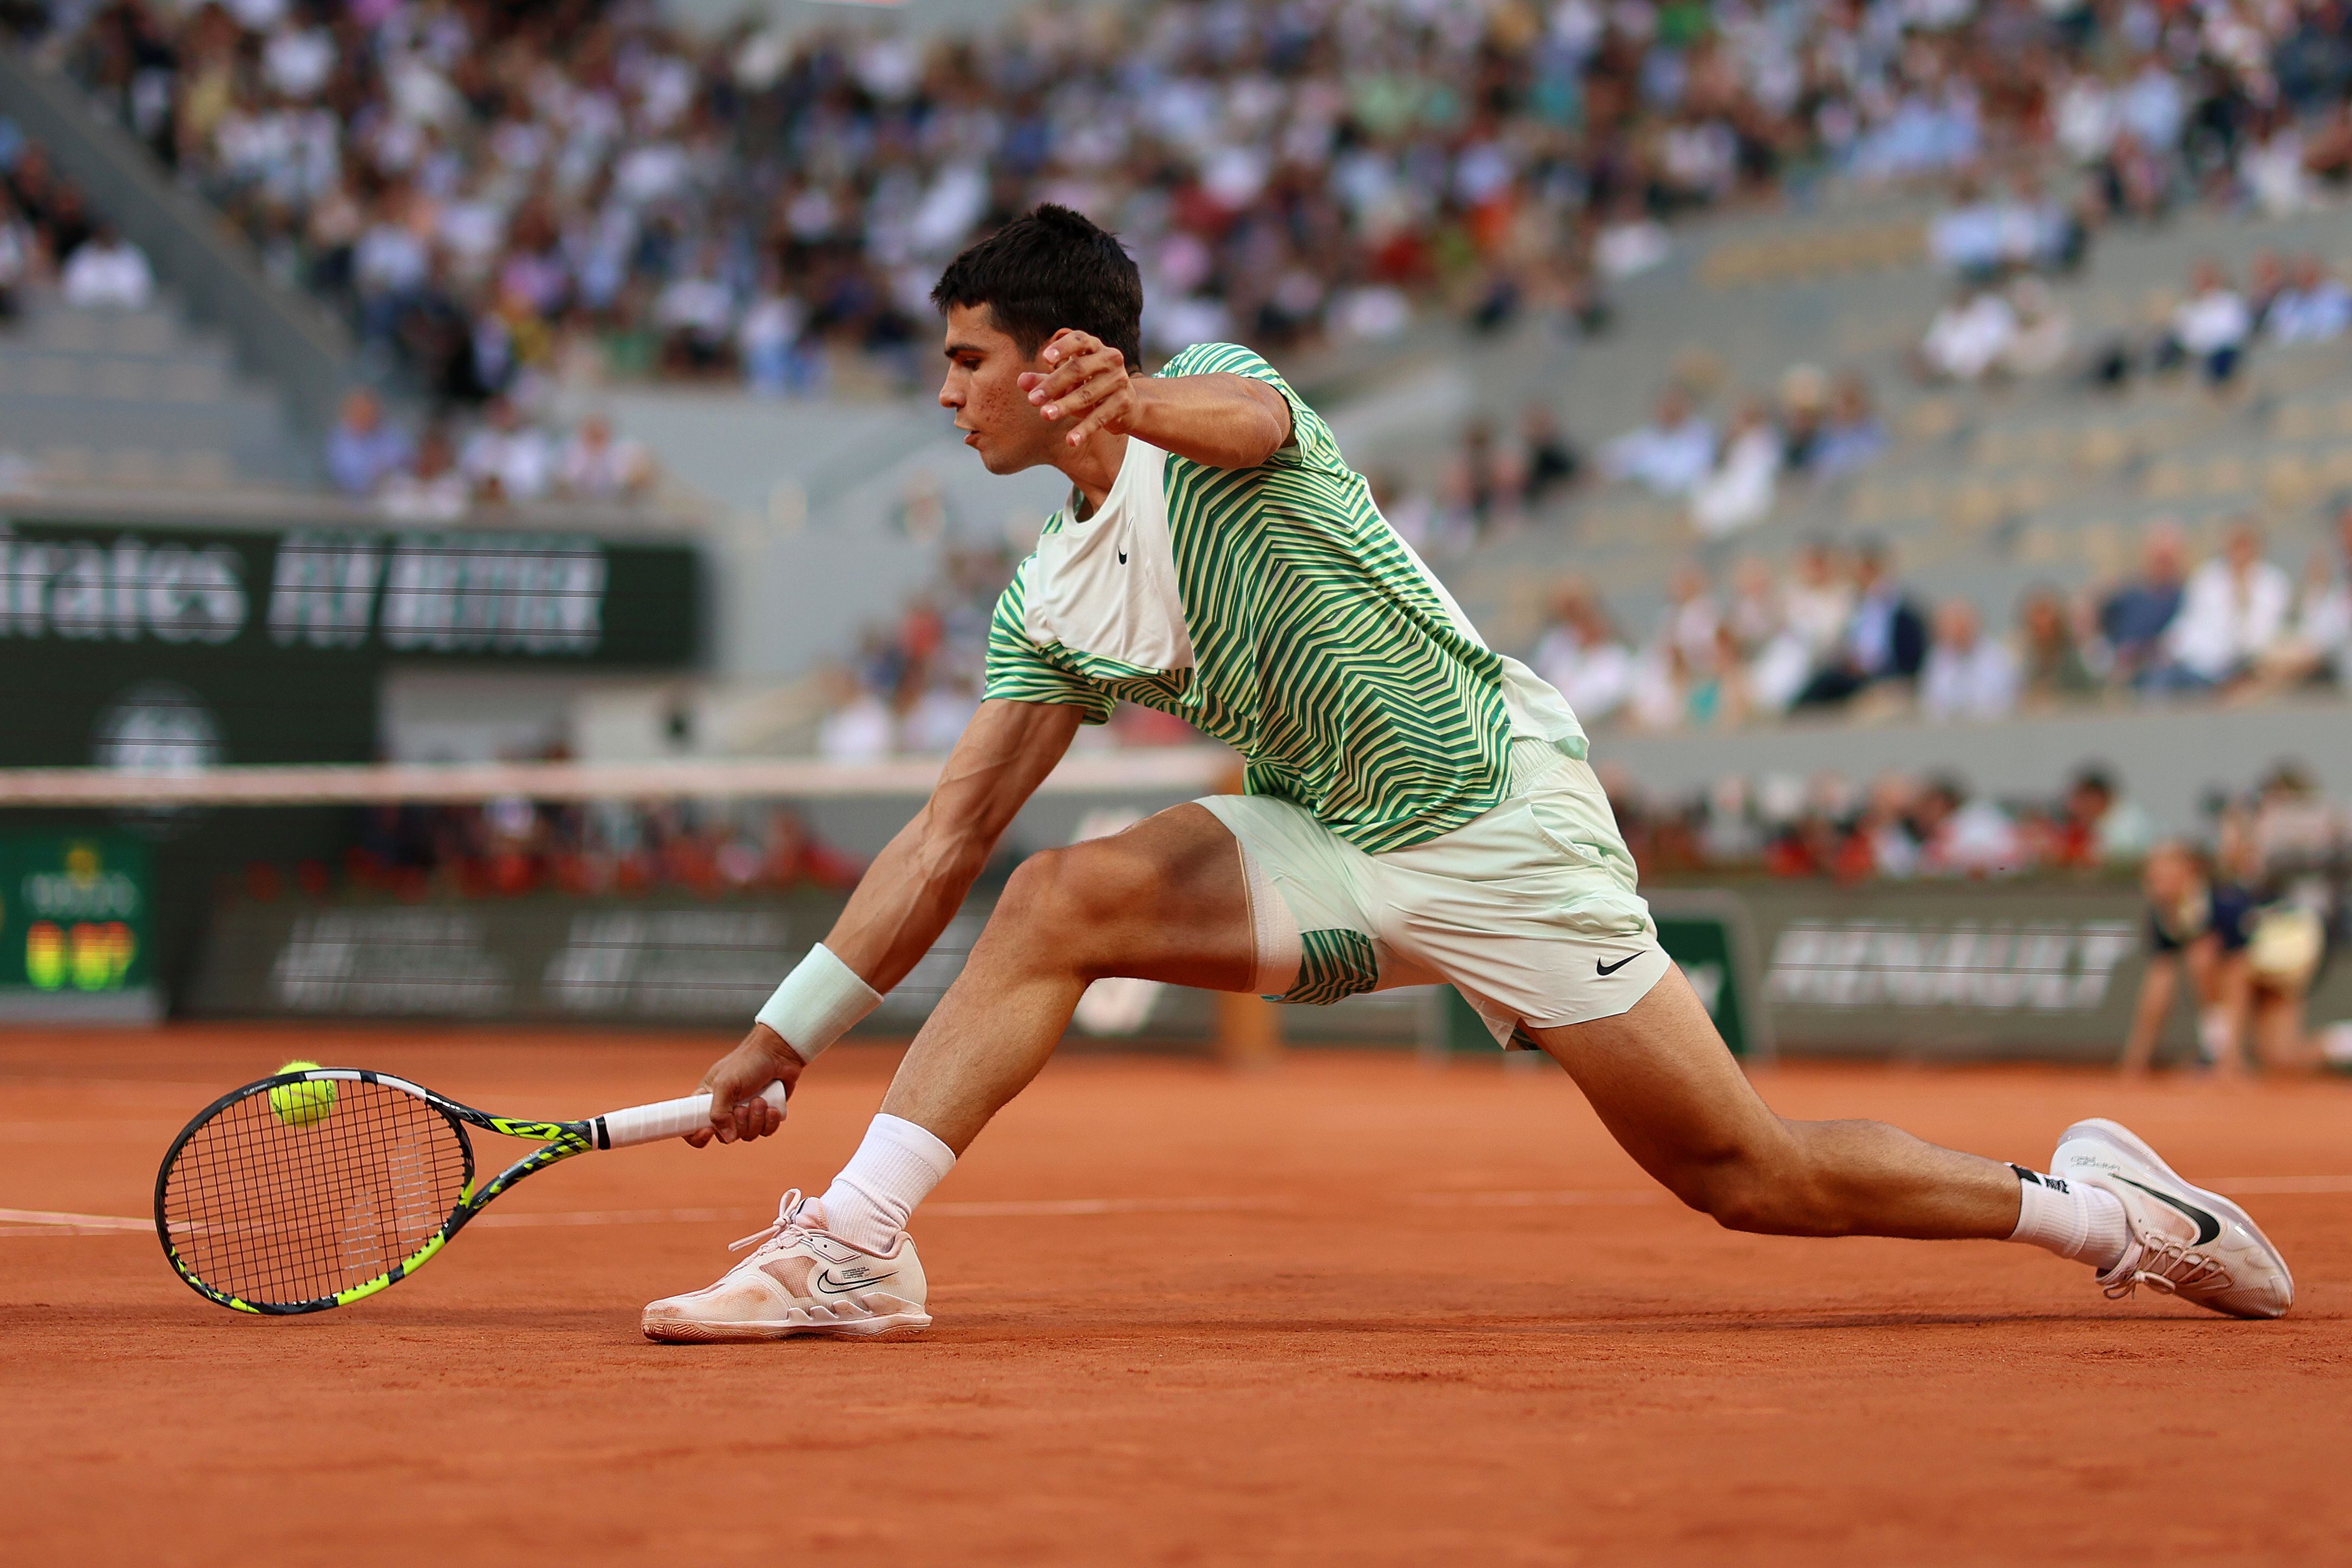 PARIS, FRANCE - JUNE 06: Carlos Alcaraz of Spain plays a backhand against Stefanos Tsitsipas of Greece during the Men's Singles Quarter Final match on Day Ten of the 2023 French Open at Roland Garros on June 06, 2023 in Paris, France. (Photo by Clive Brunskill/Getty Images)